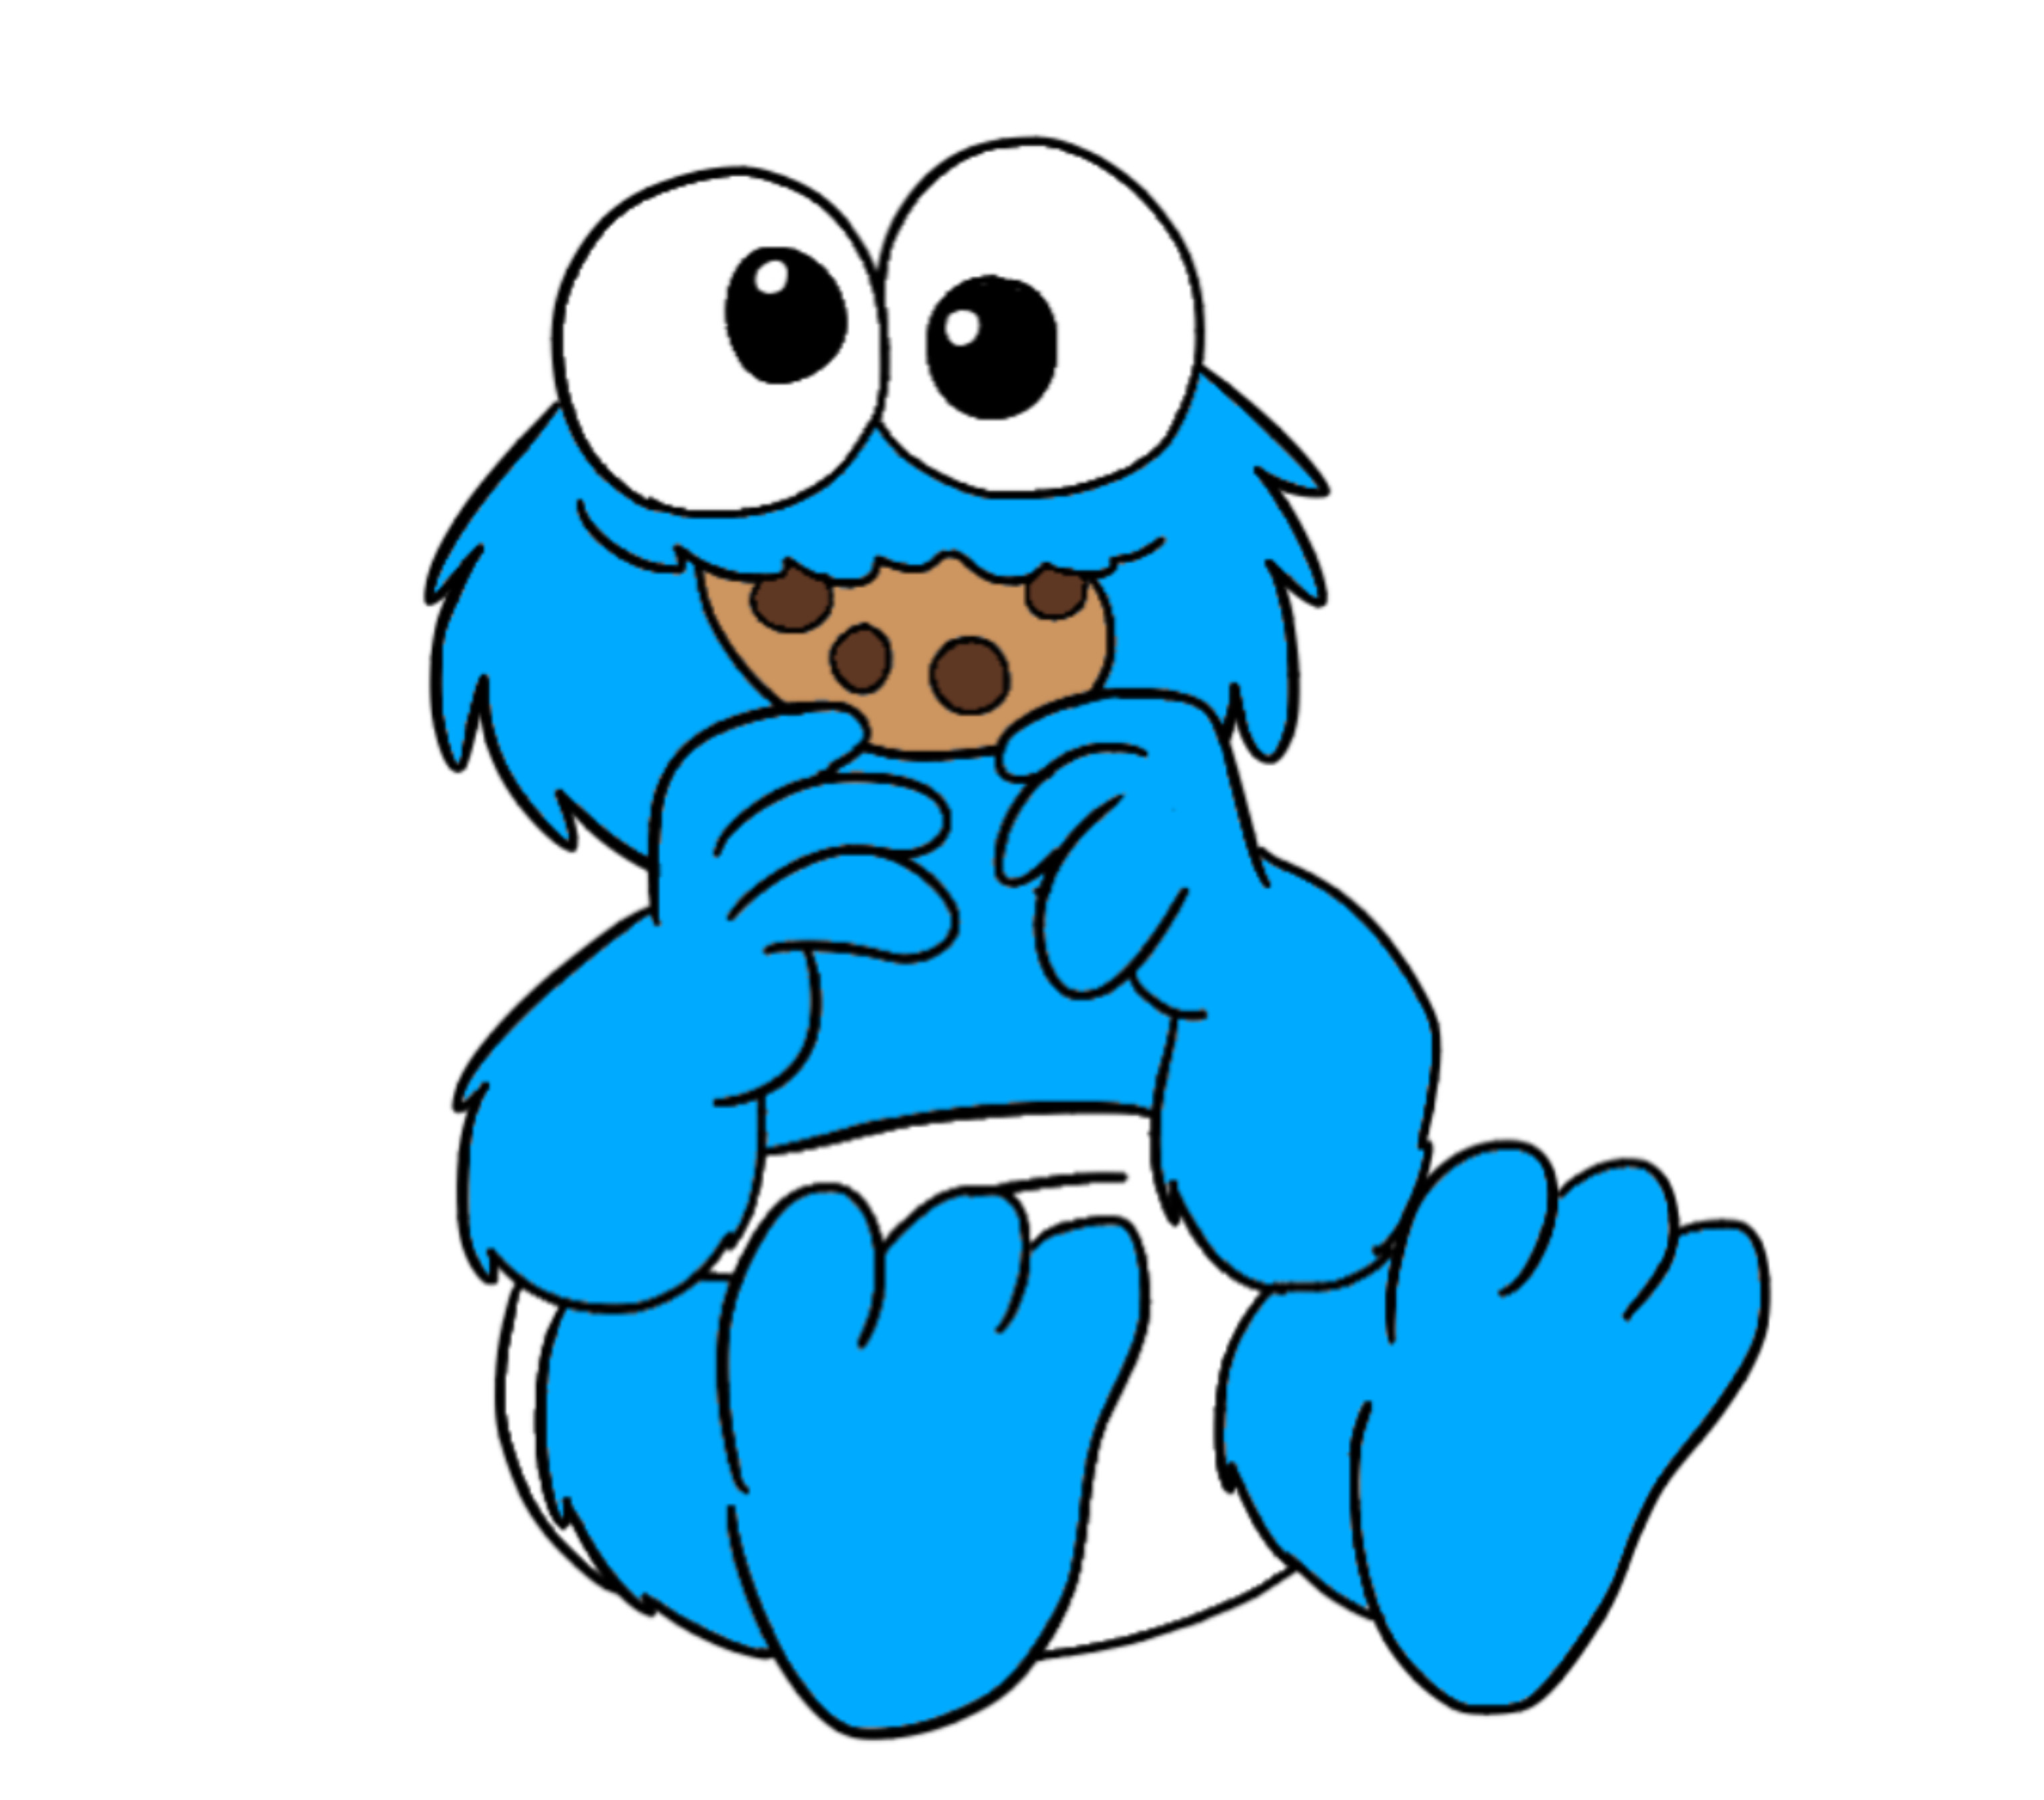 Baby Cookie Monster SVG - Gravectory